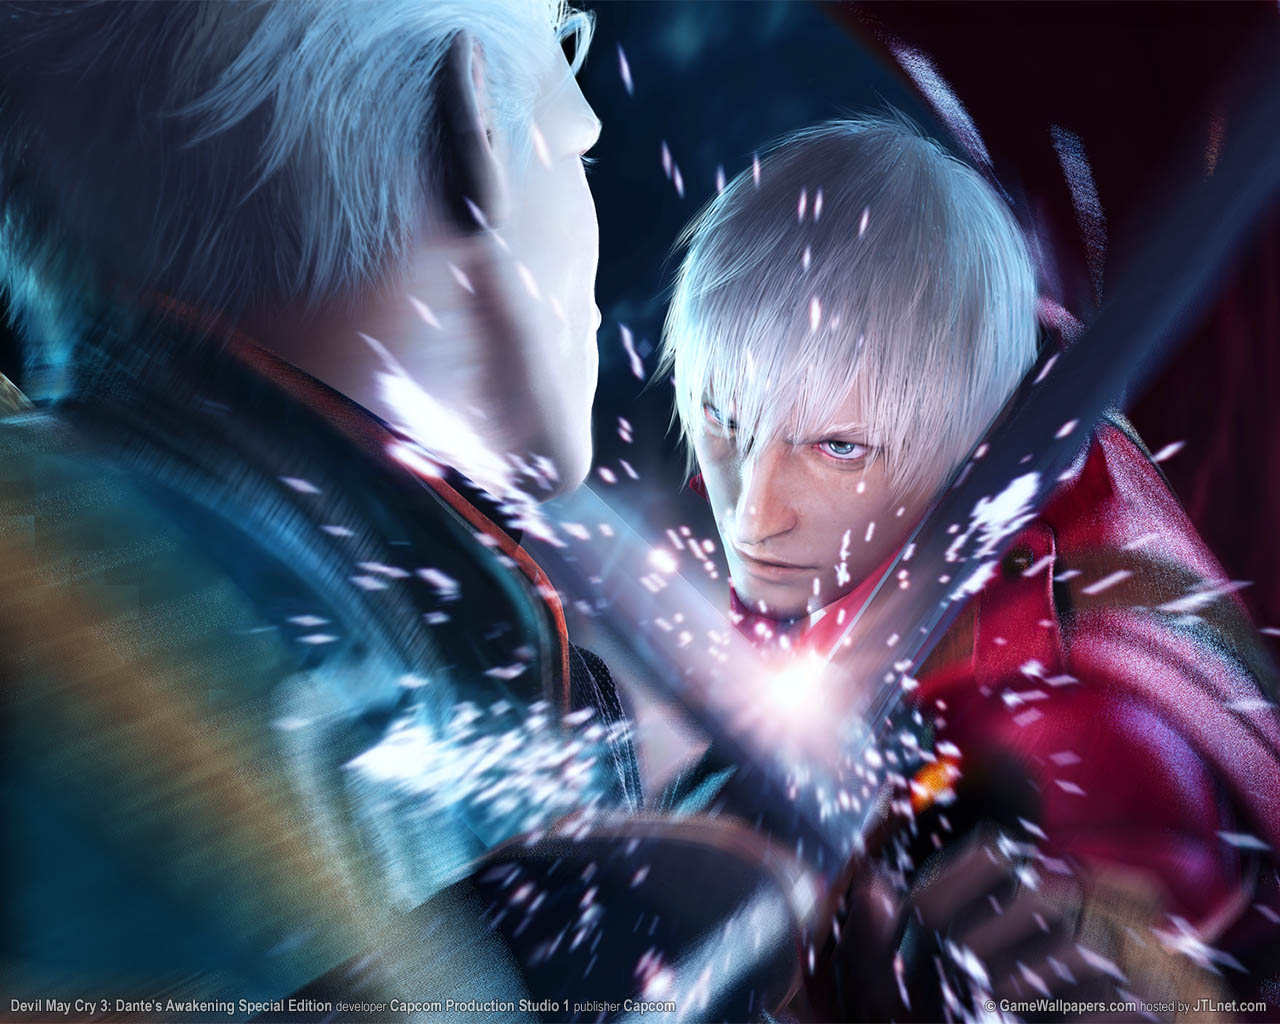 Devil May Cry 3%3A Dante%5C%27s Awakening Special Edition wallpaper 01 1280x1024